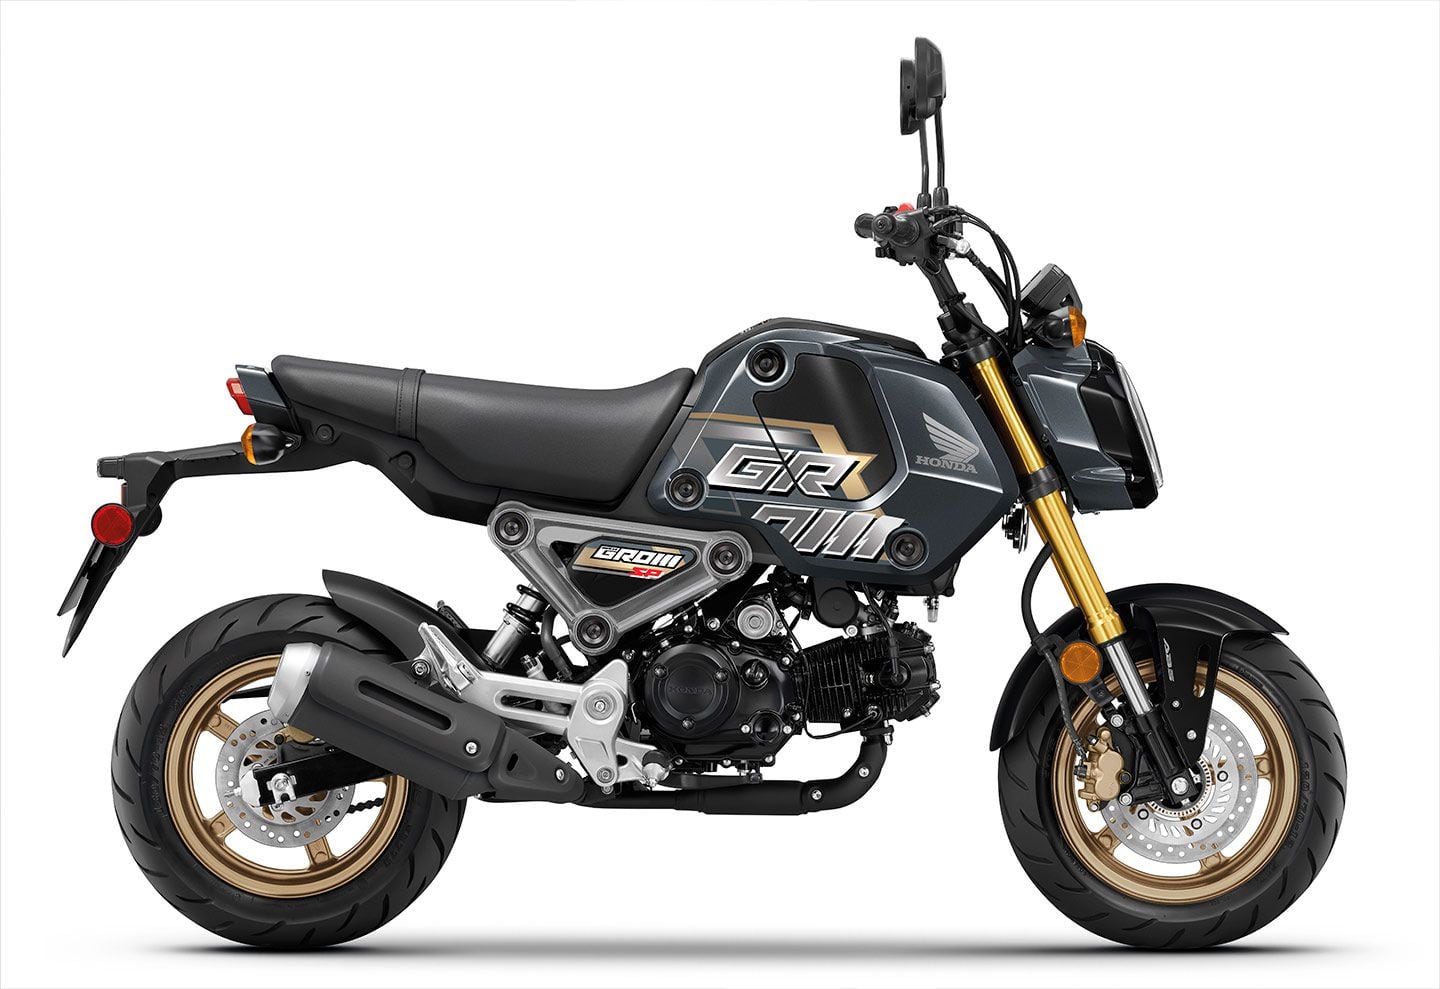 Gold rims and special graphics on the Matte Gray Metallic body work make the Grom SP stand out in its own way.